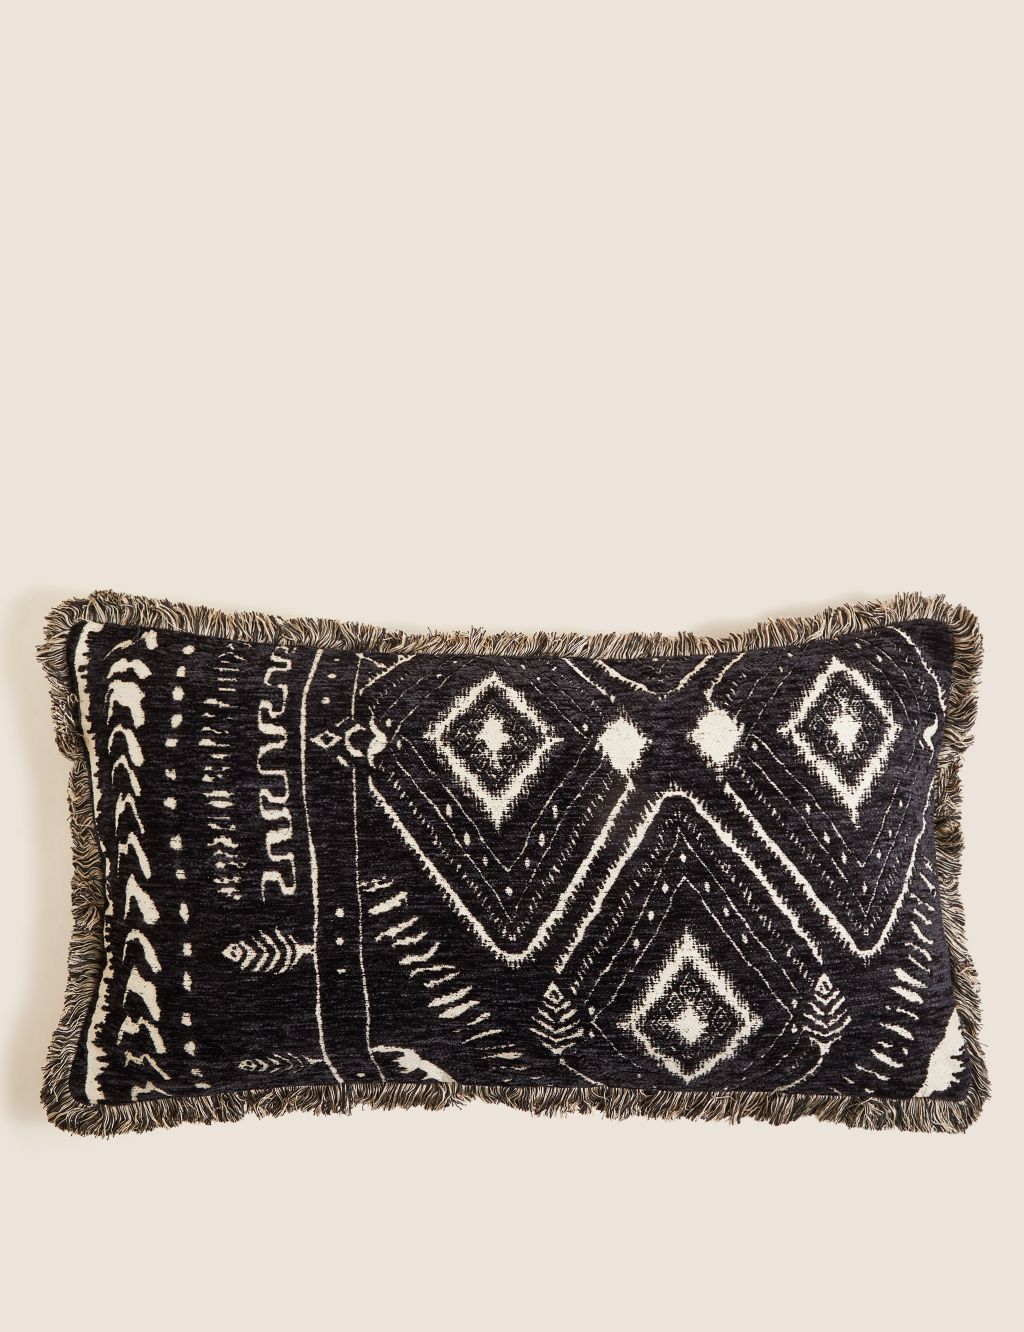 Chenille Patterned Bolster Cushion image 1